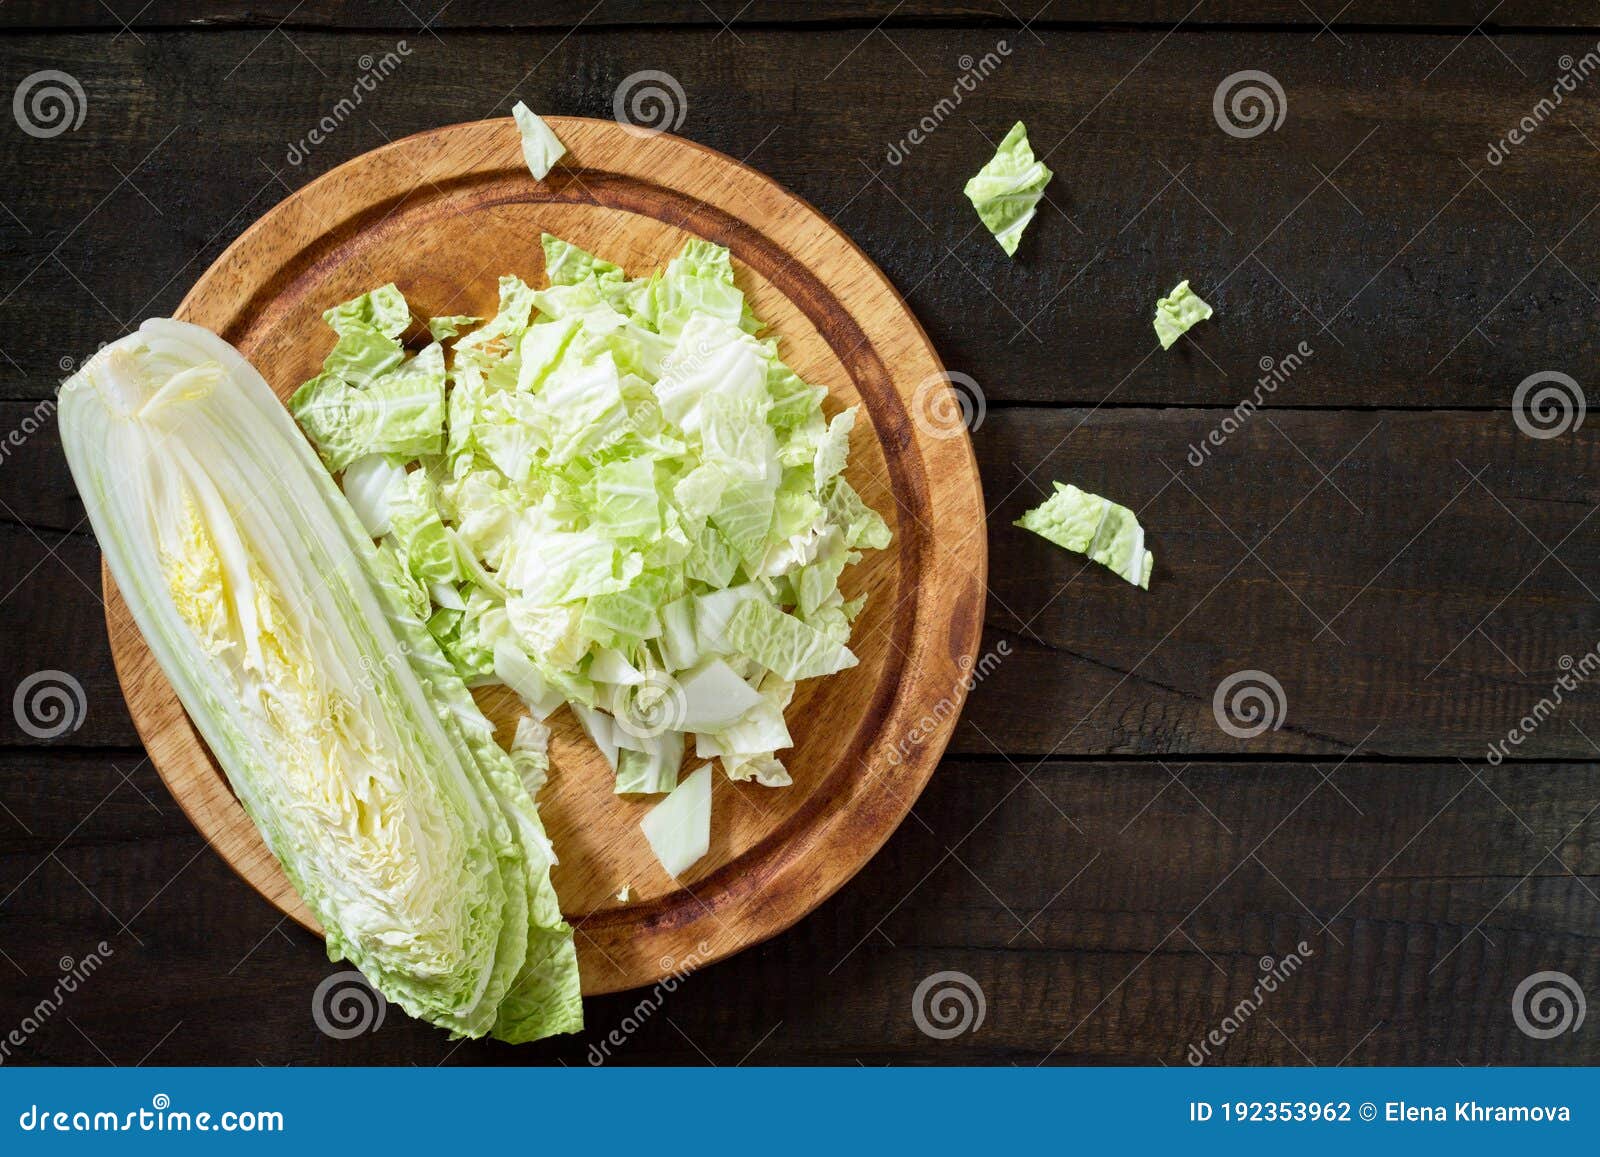 fresh celery cabbage on a vintage wooden fone.